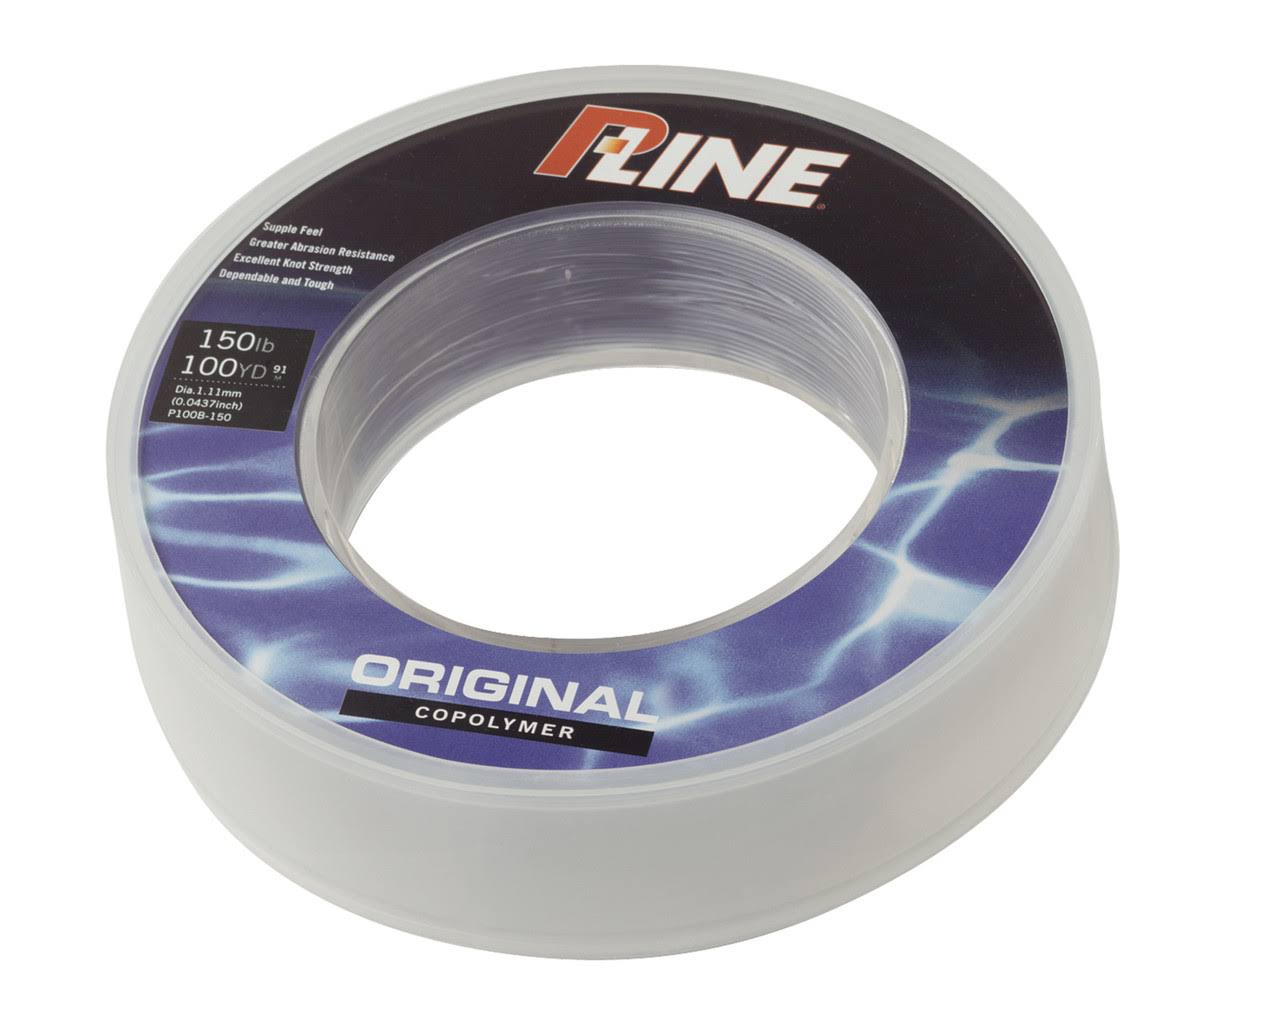 P-Line 100 Yard Leader, 60kg | Boating & Fishing | 30 Day Money Back Guarantee | Delivery guaranteed | Best Price Guarantee